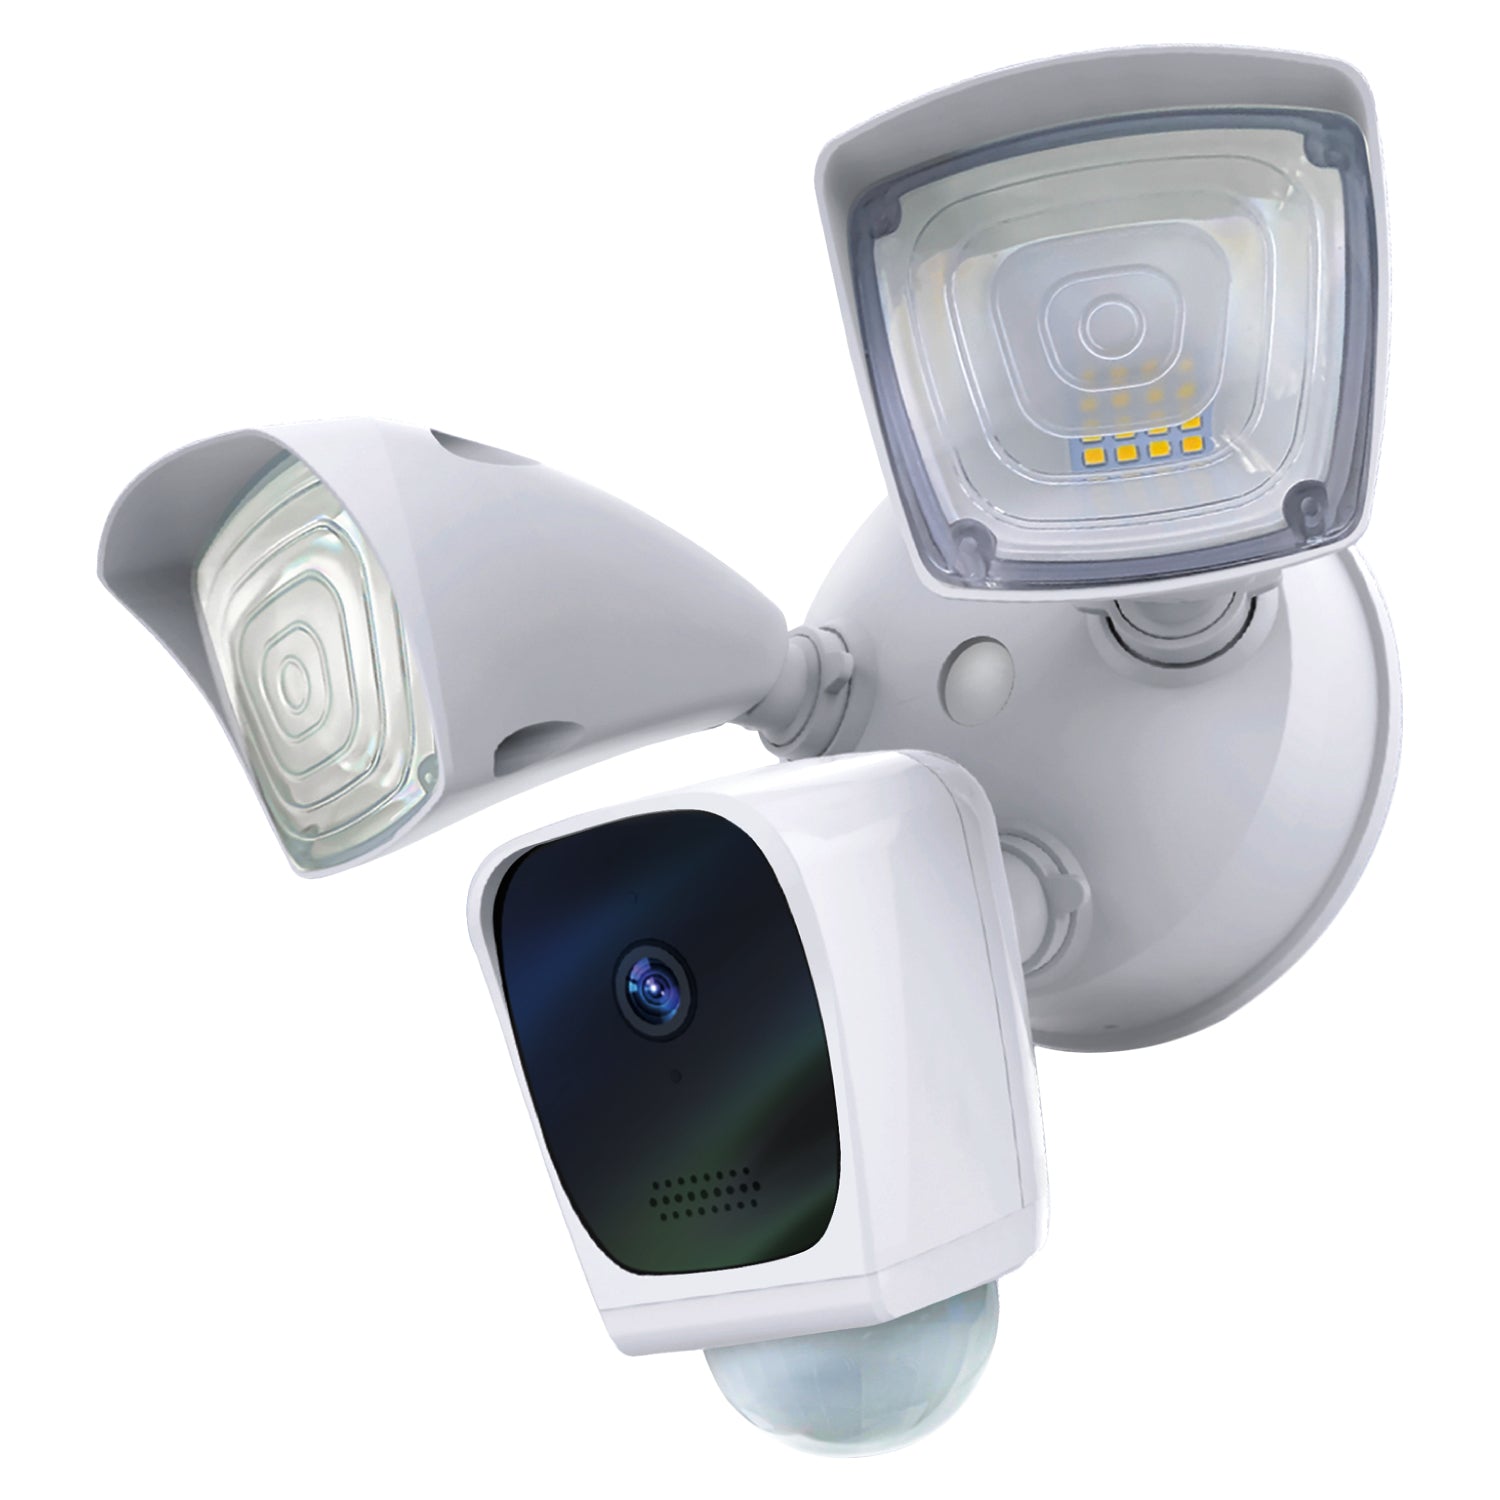 Home-Zone-Security-Bright-LED-Security-Flood-Light-With-1080p-Wi-Fi-Camera-image-1